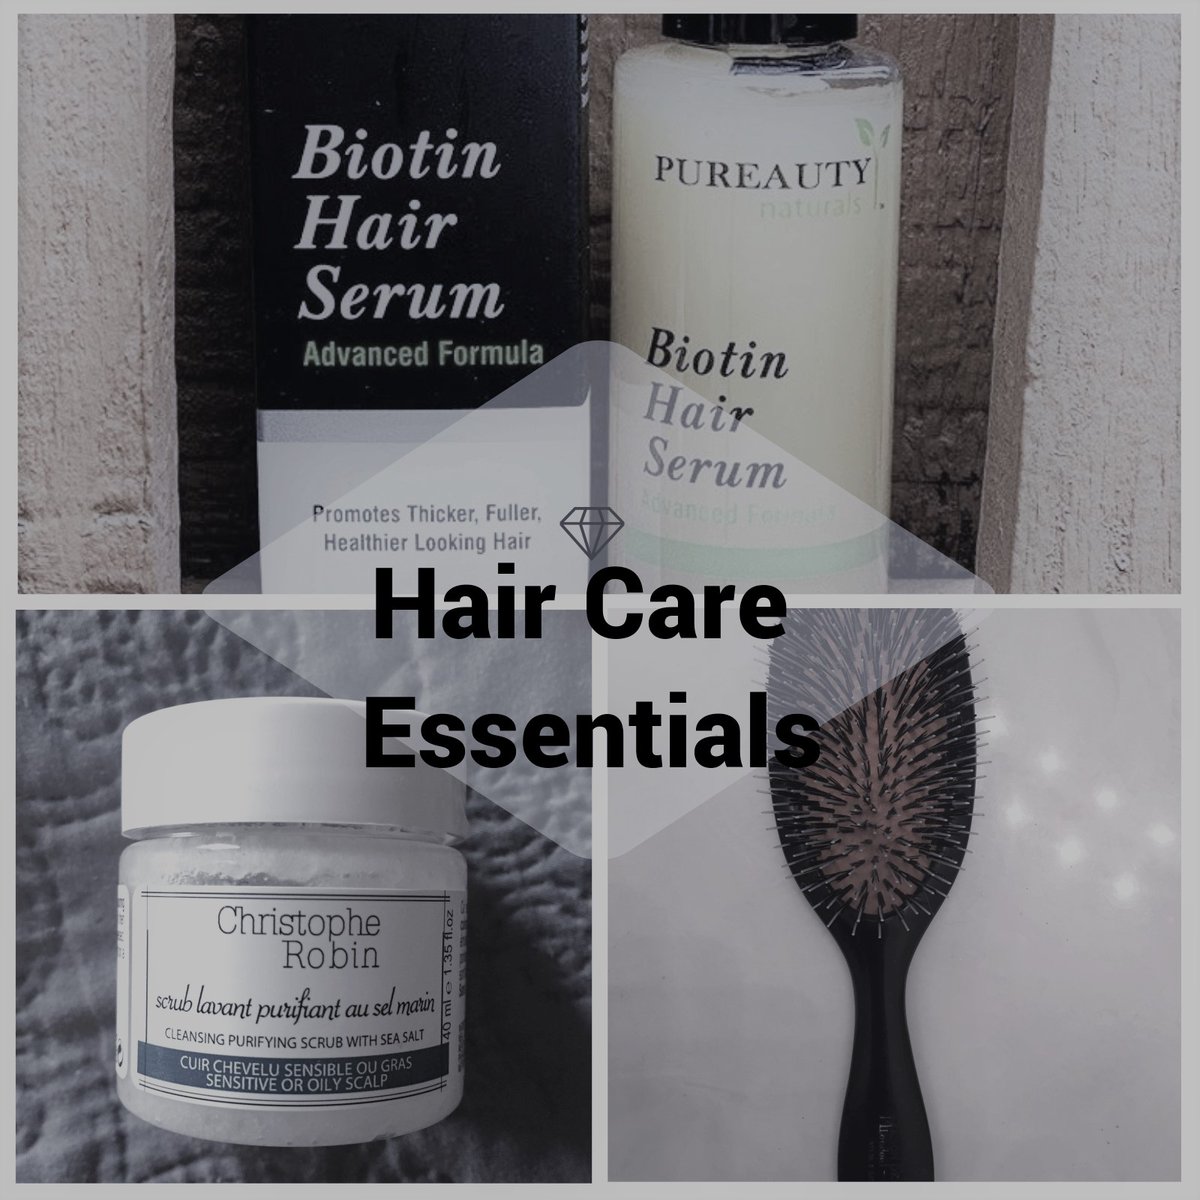 These days, hair care is all about doing the minimum necessary. Enter the essentials of 2020: Mason Pearson hairbrush, a good scalp scrub, and a great hair serum! 
@pureauty_naturals  #MyBiotin #HairForDays #sponsored #BeautifulHair pureautynaturals.com